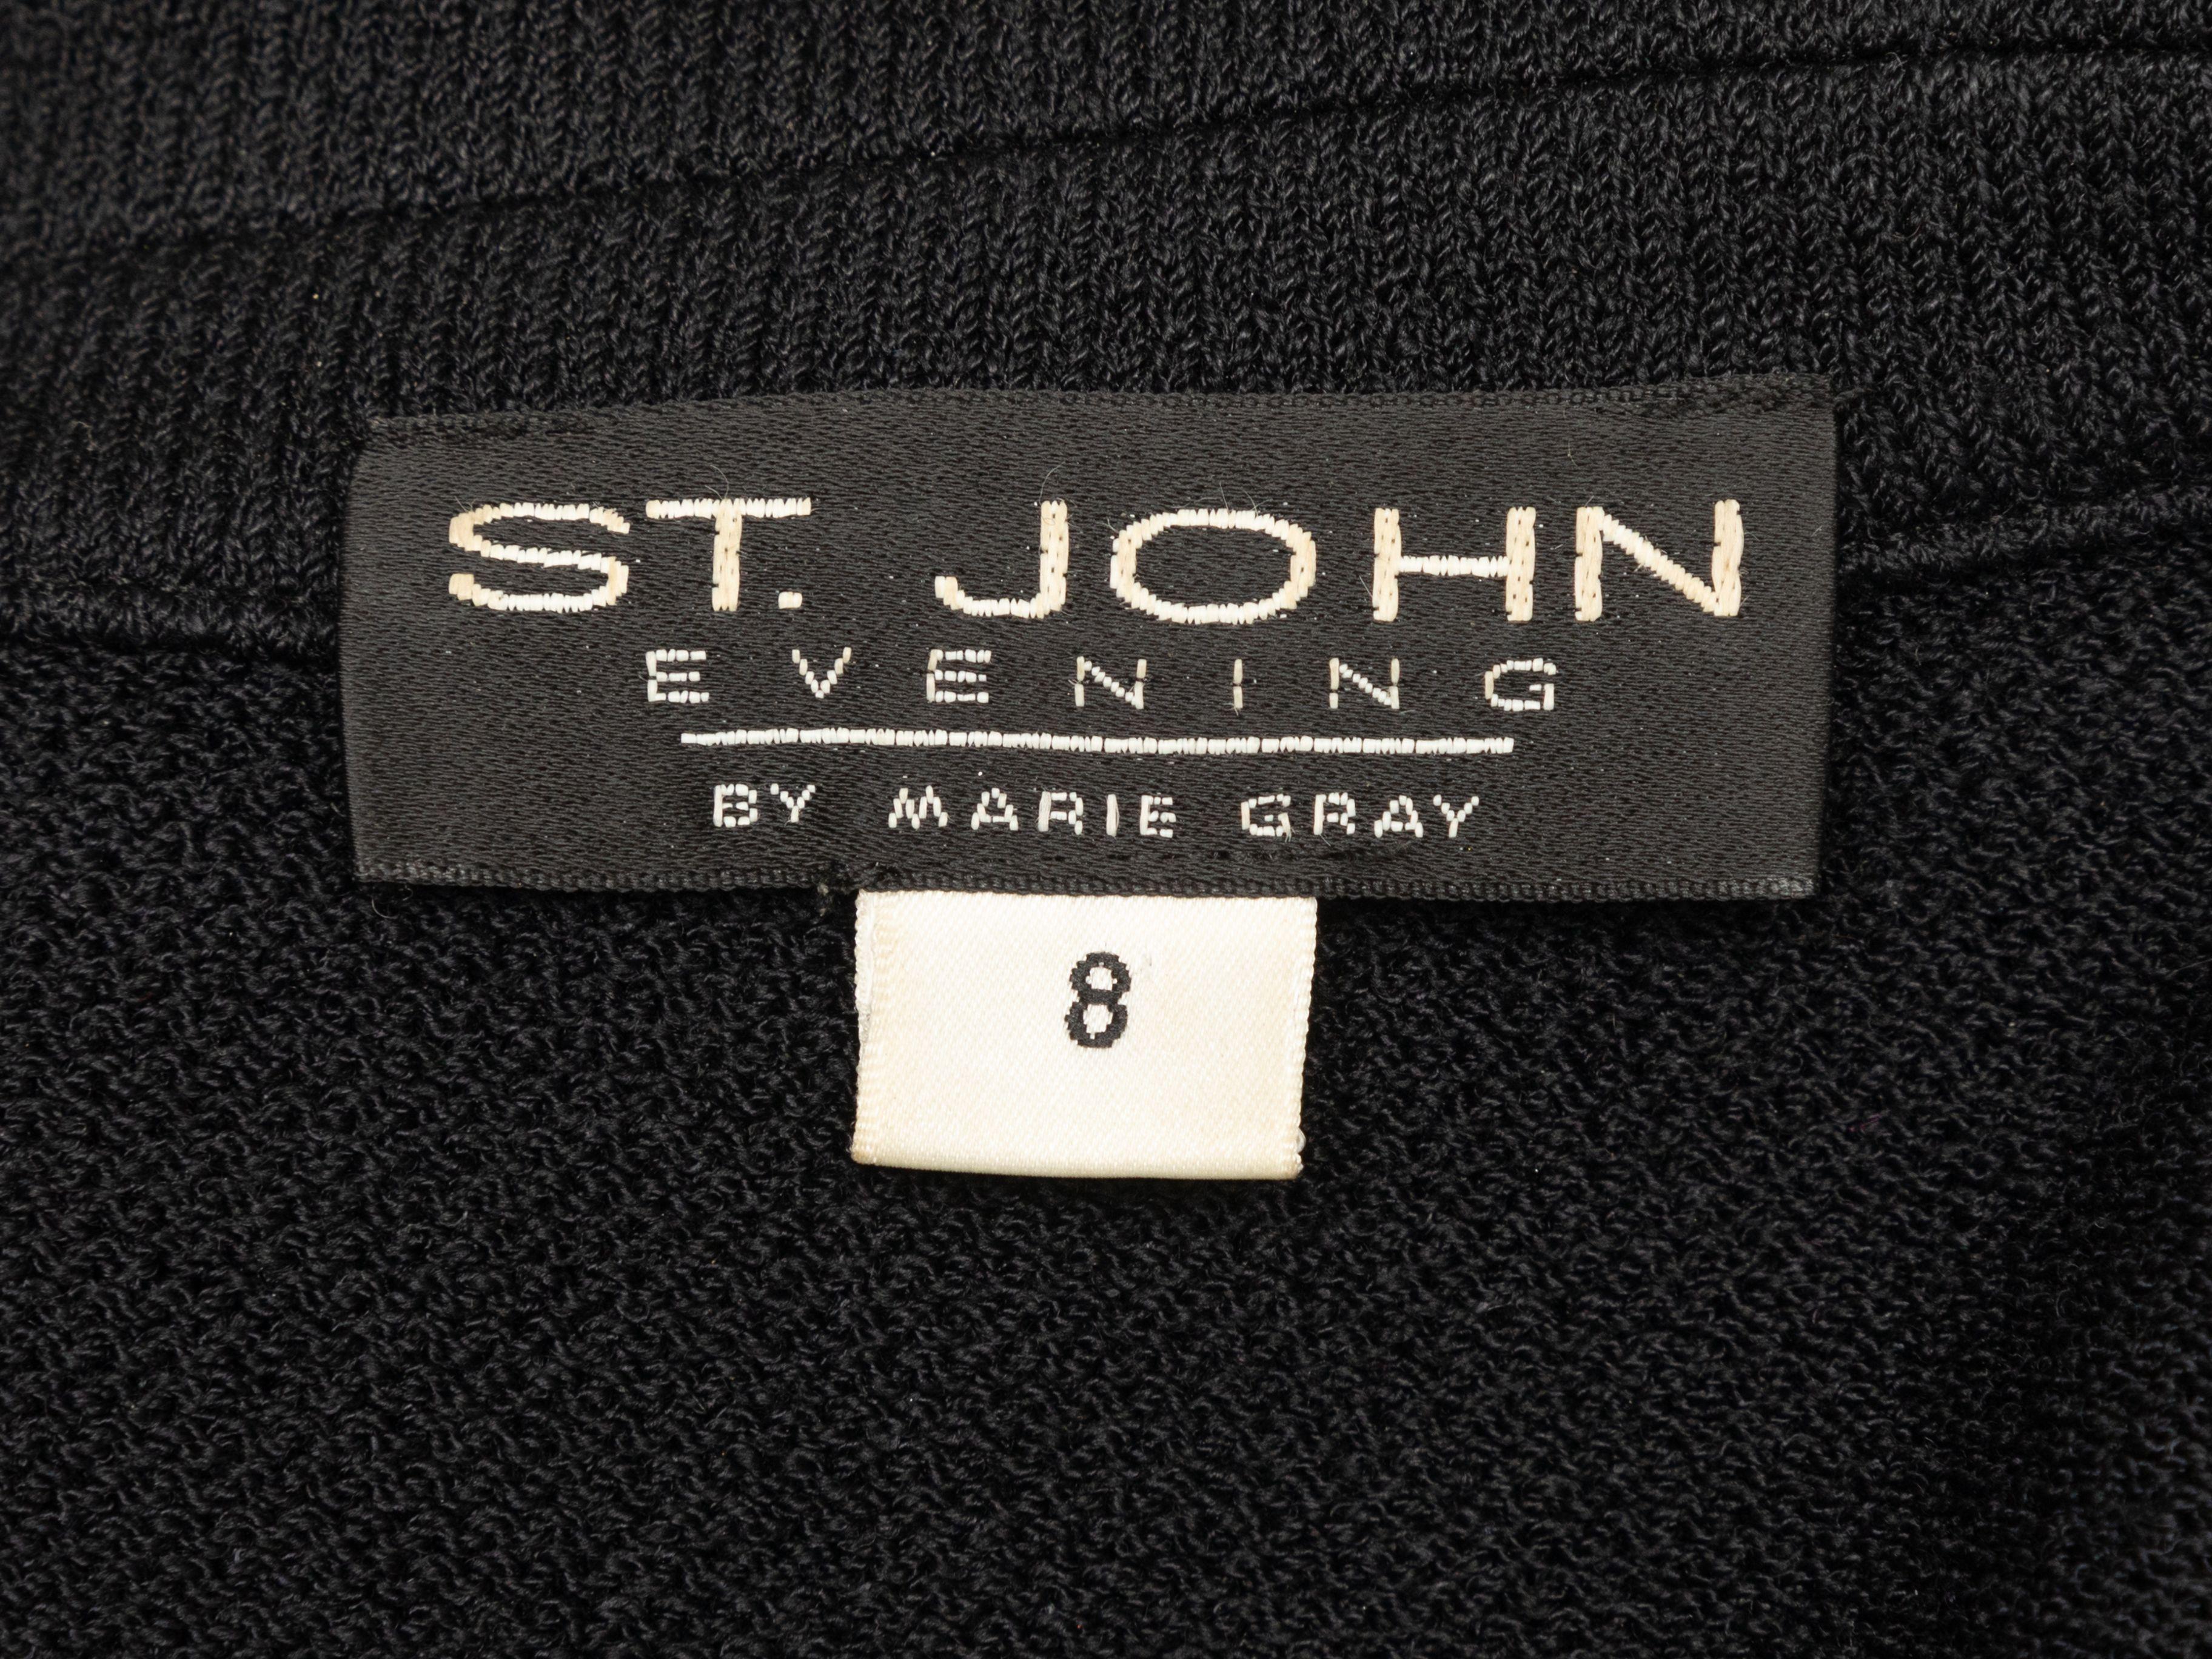 Product Details: Black knit blazer by St. John. Rhinestone trim embellishments throughout. Notched collar. Dual flap pockets at hips. Rhinestone button closures at center front. 34